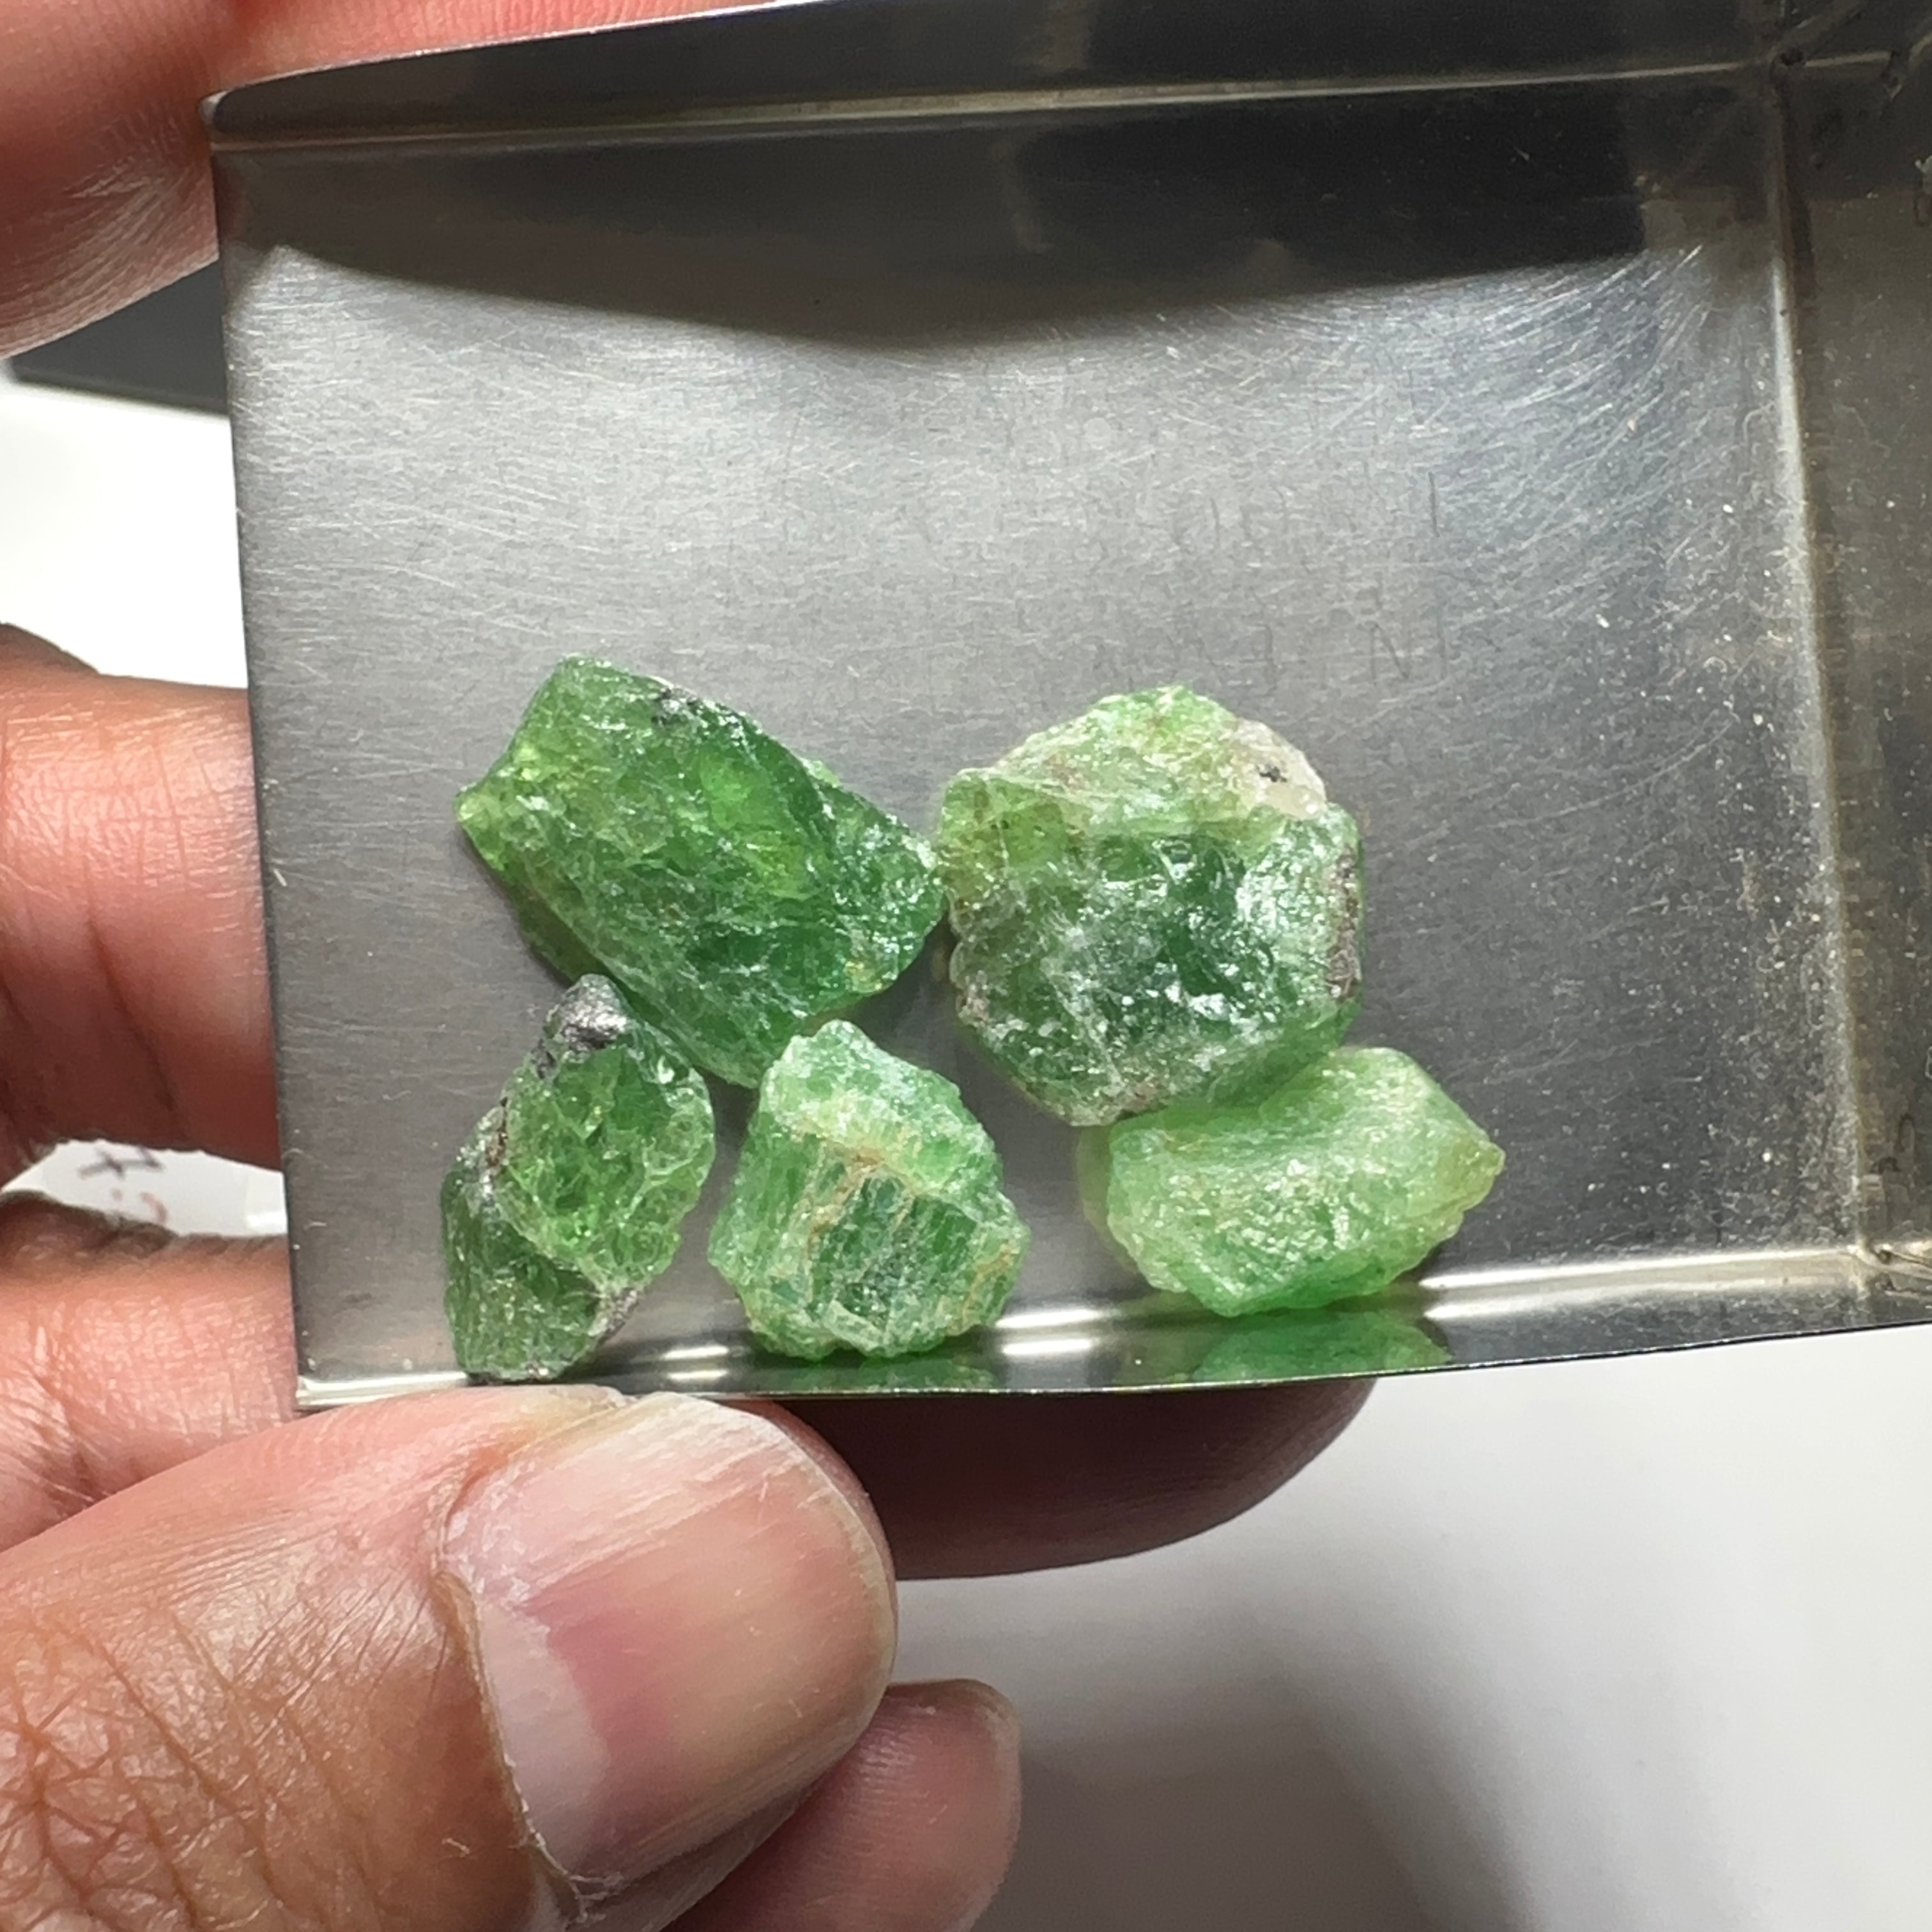 47.28ct Tsavorite Garnet Lot, Tanzania. Untreated Unheated. 5.37ct - 14.51ct. All included, slightly transparent, good for setting in jewellery as is or as specimens to add to a collection